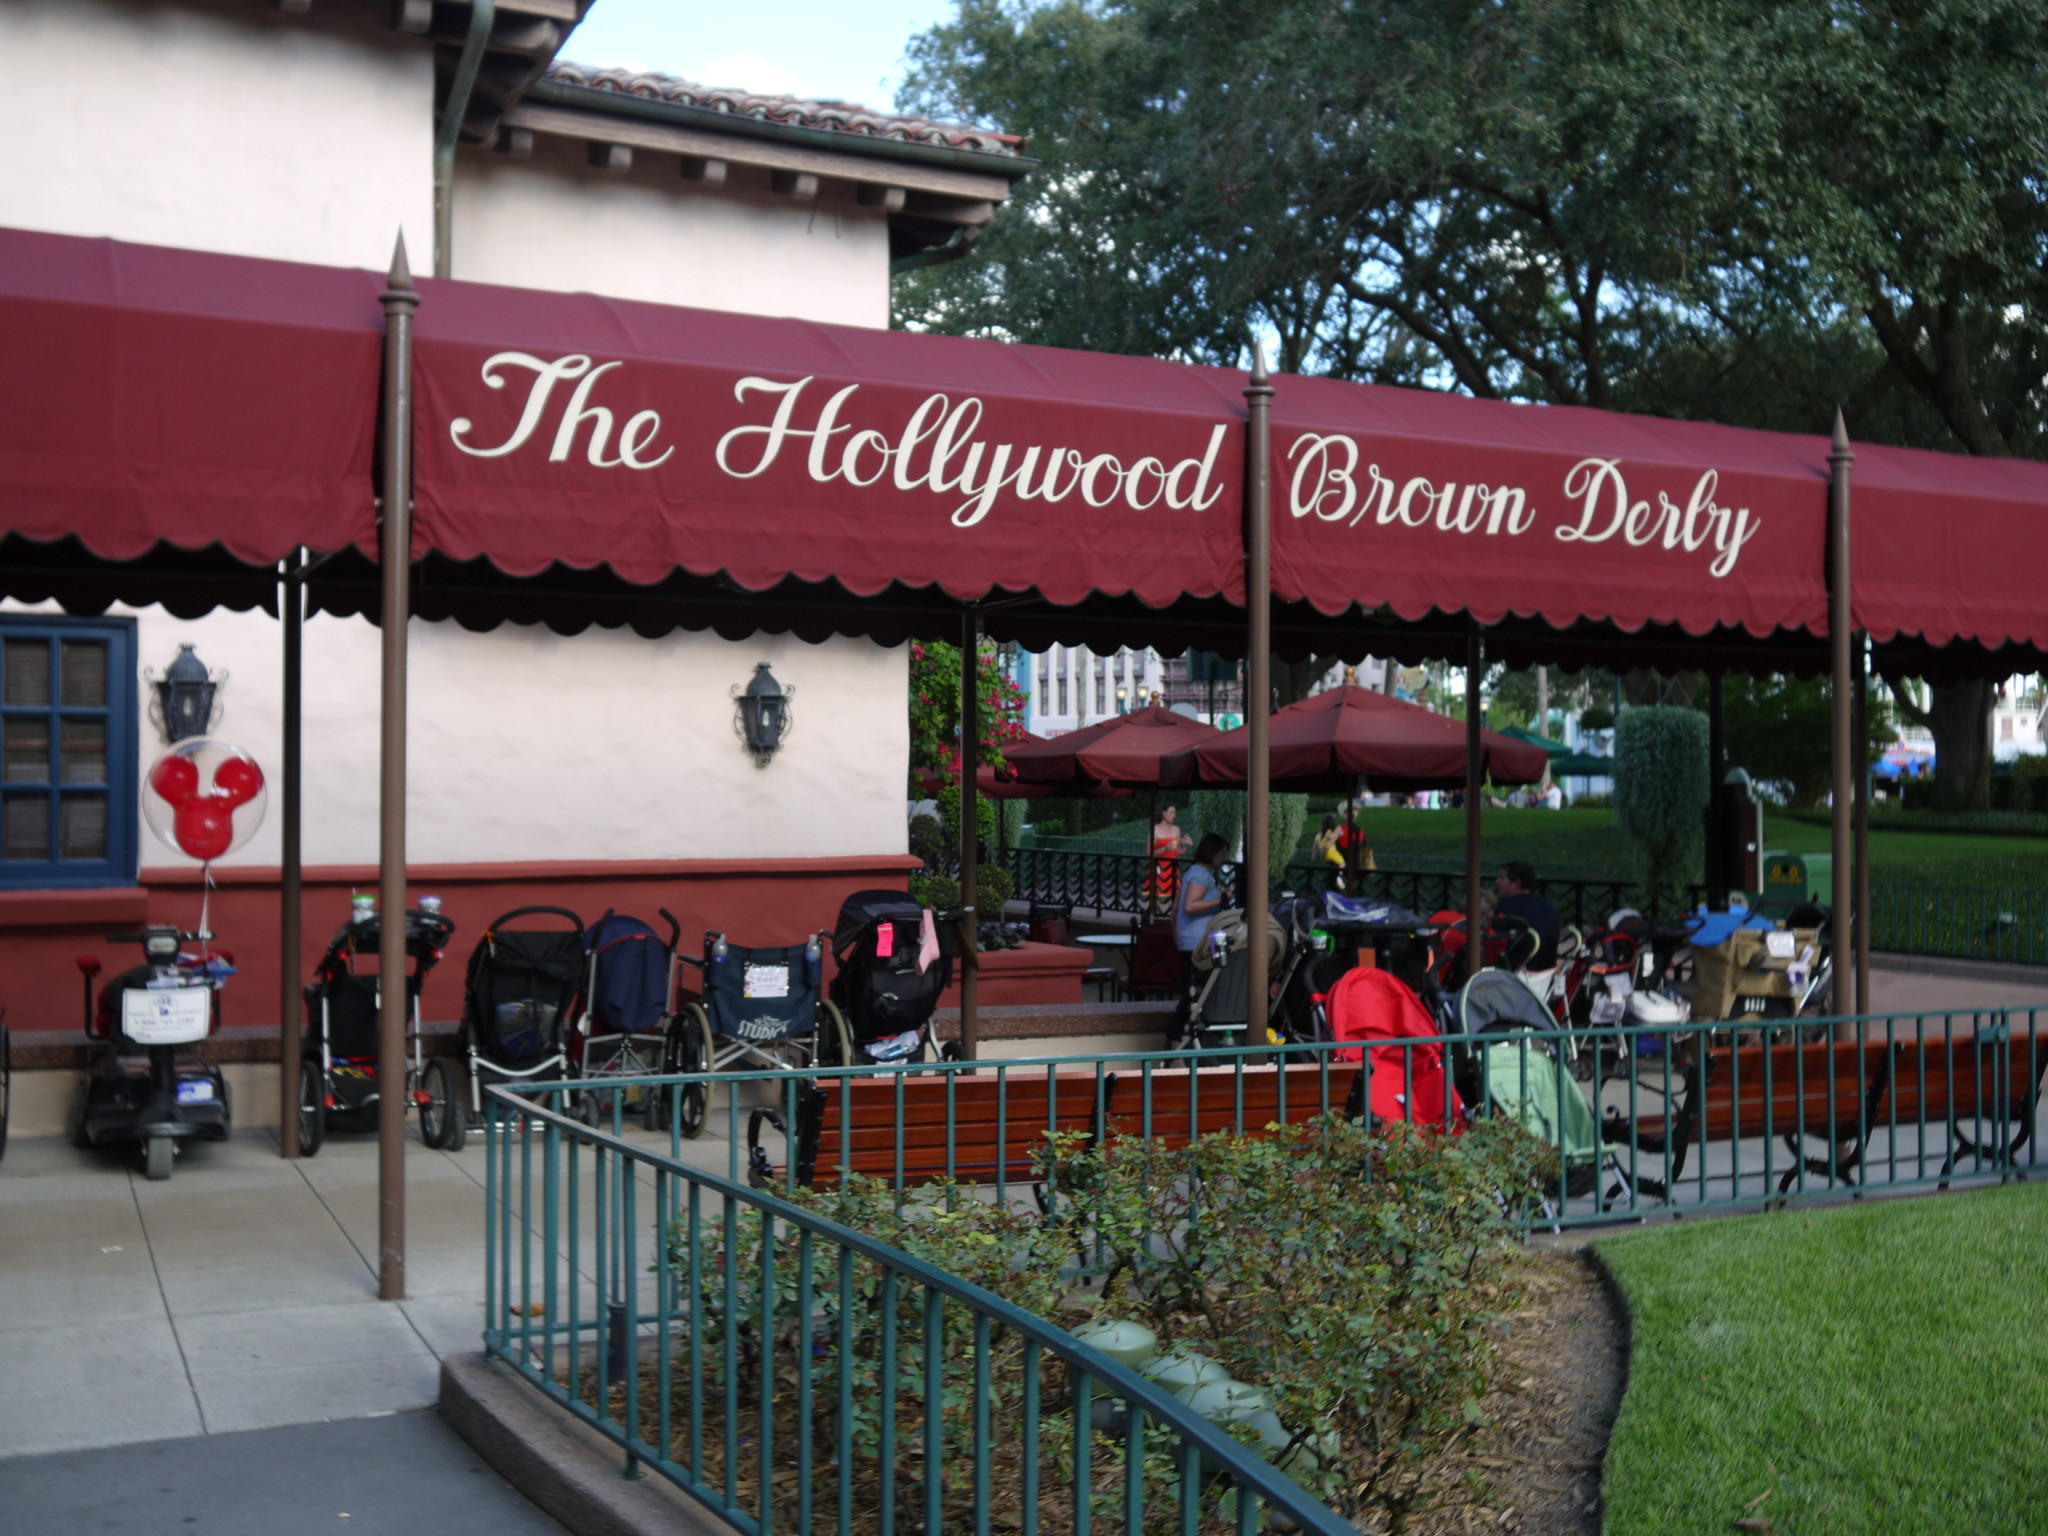 Hollywood Brown Derby Lounge Opens at Hollywood Studios